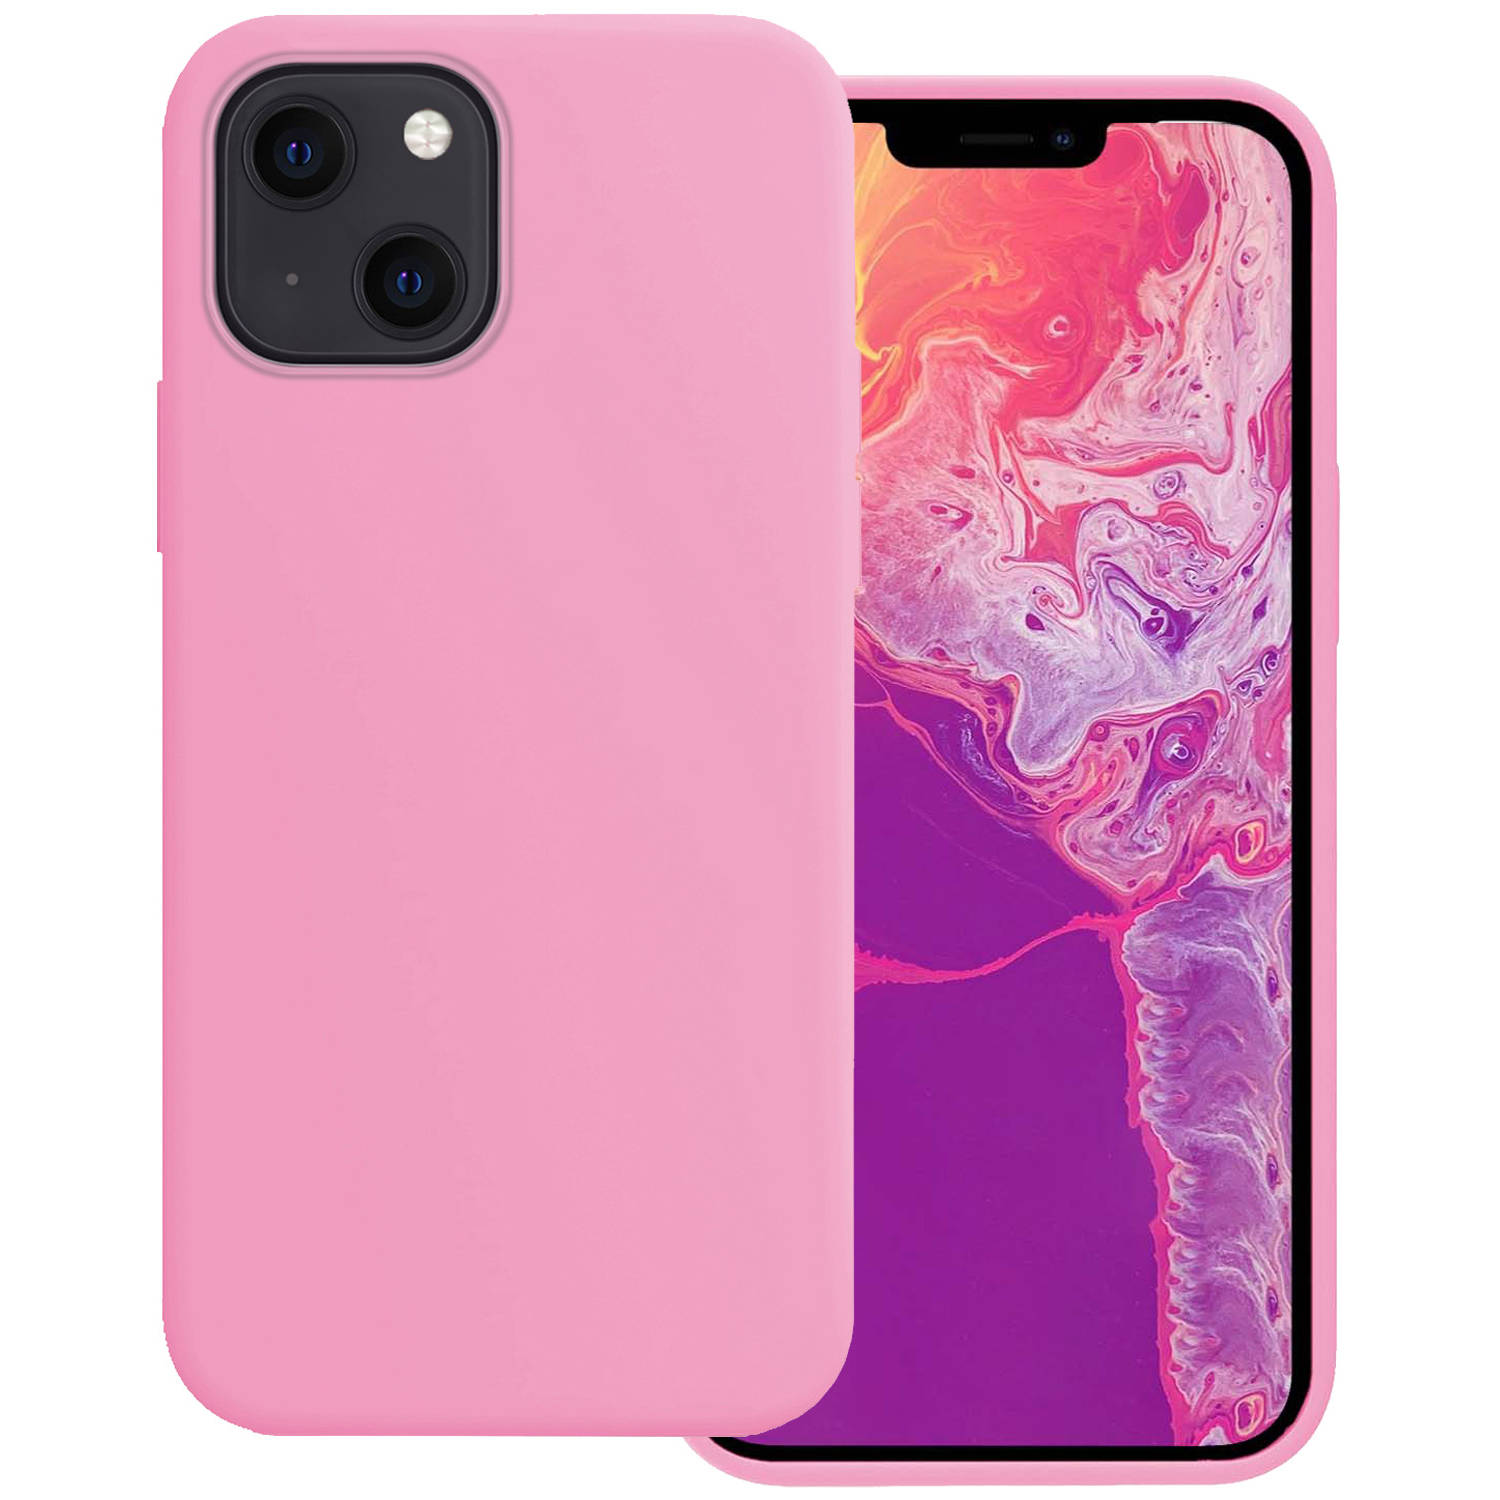 Basey Iphone 13 Hoesje Silicone Case Iphone 13 Case Licht Roze Siliconen Hoes Iphone 13 Hoes Cover L